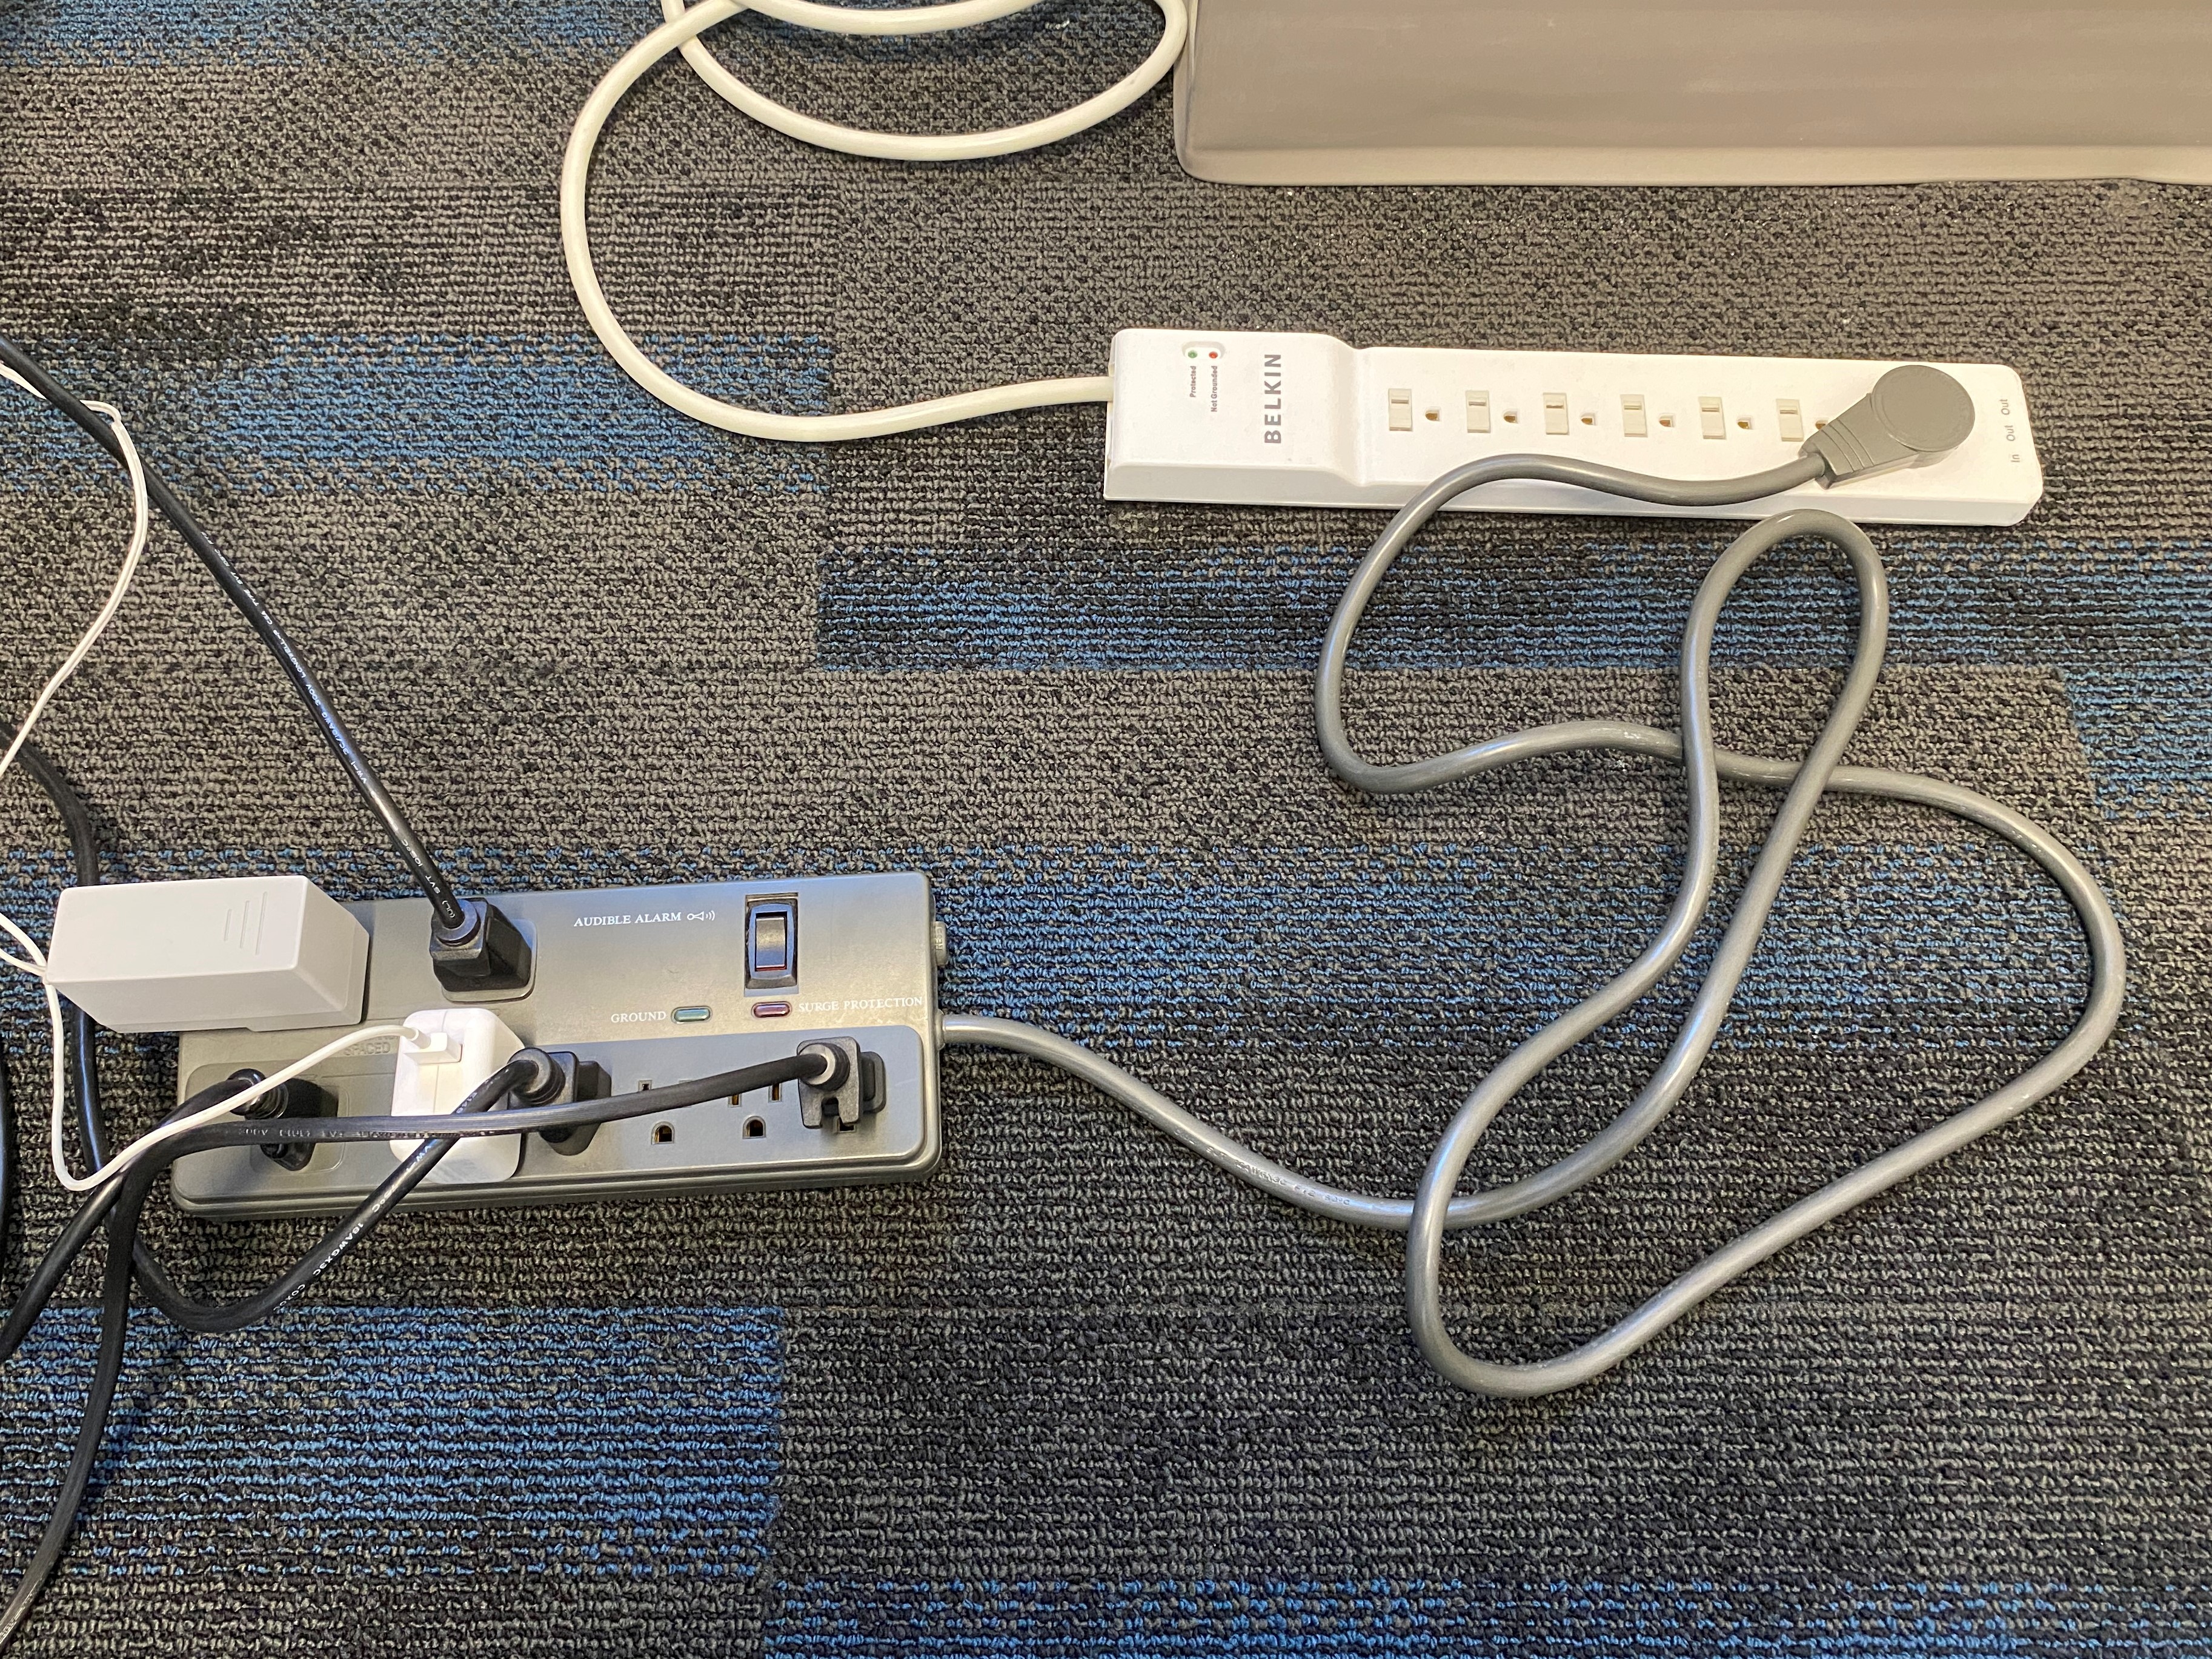 Two power strips daisy changed together.